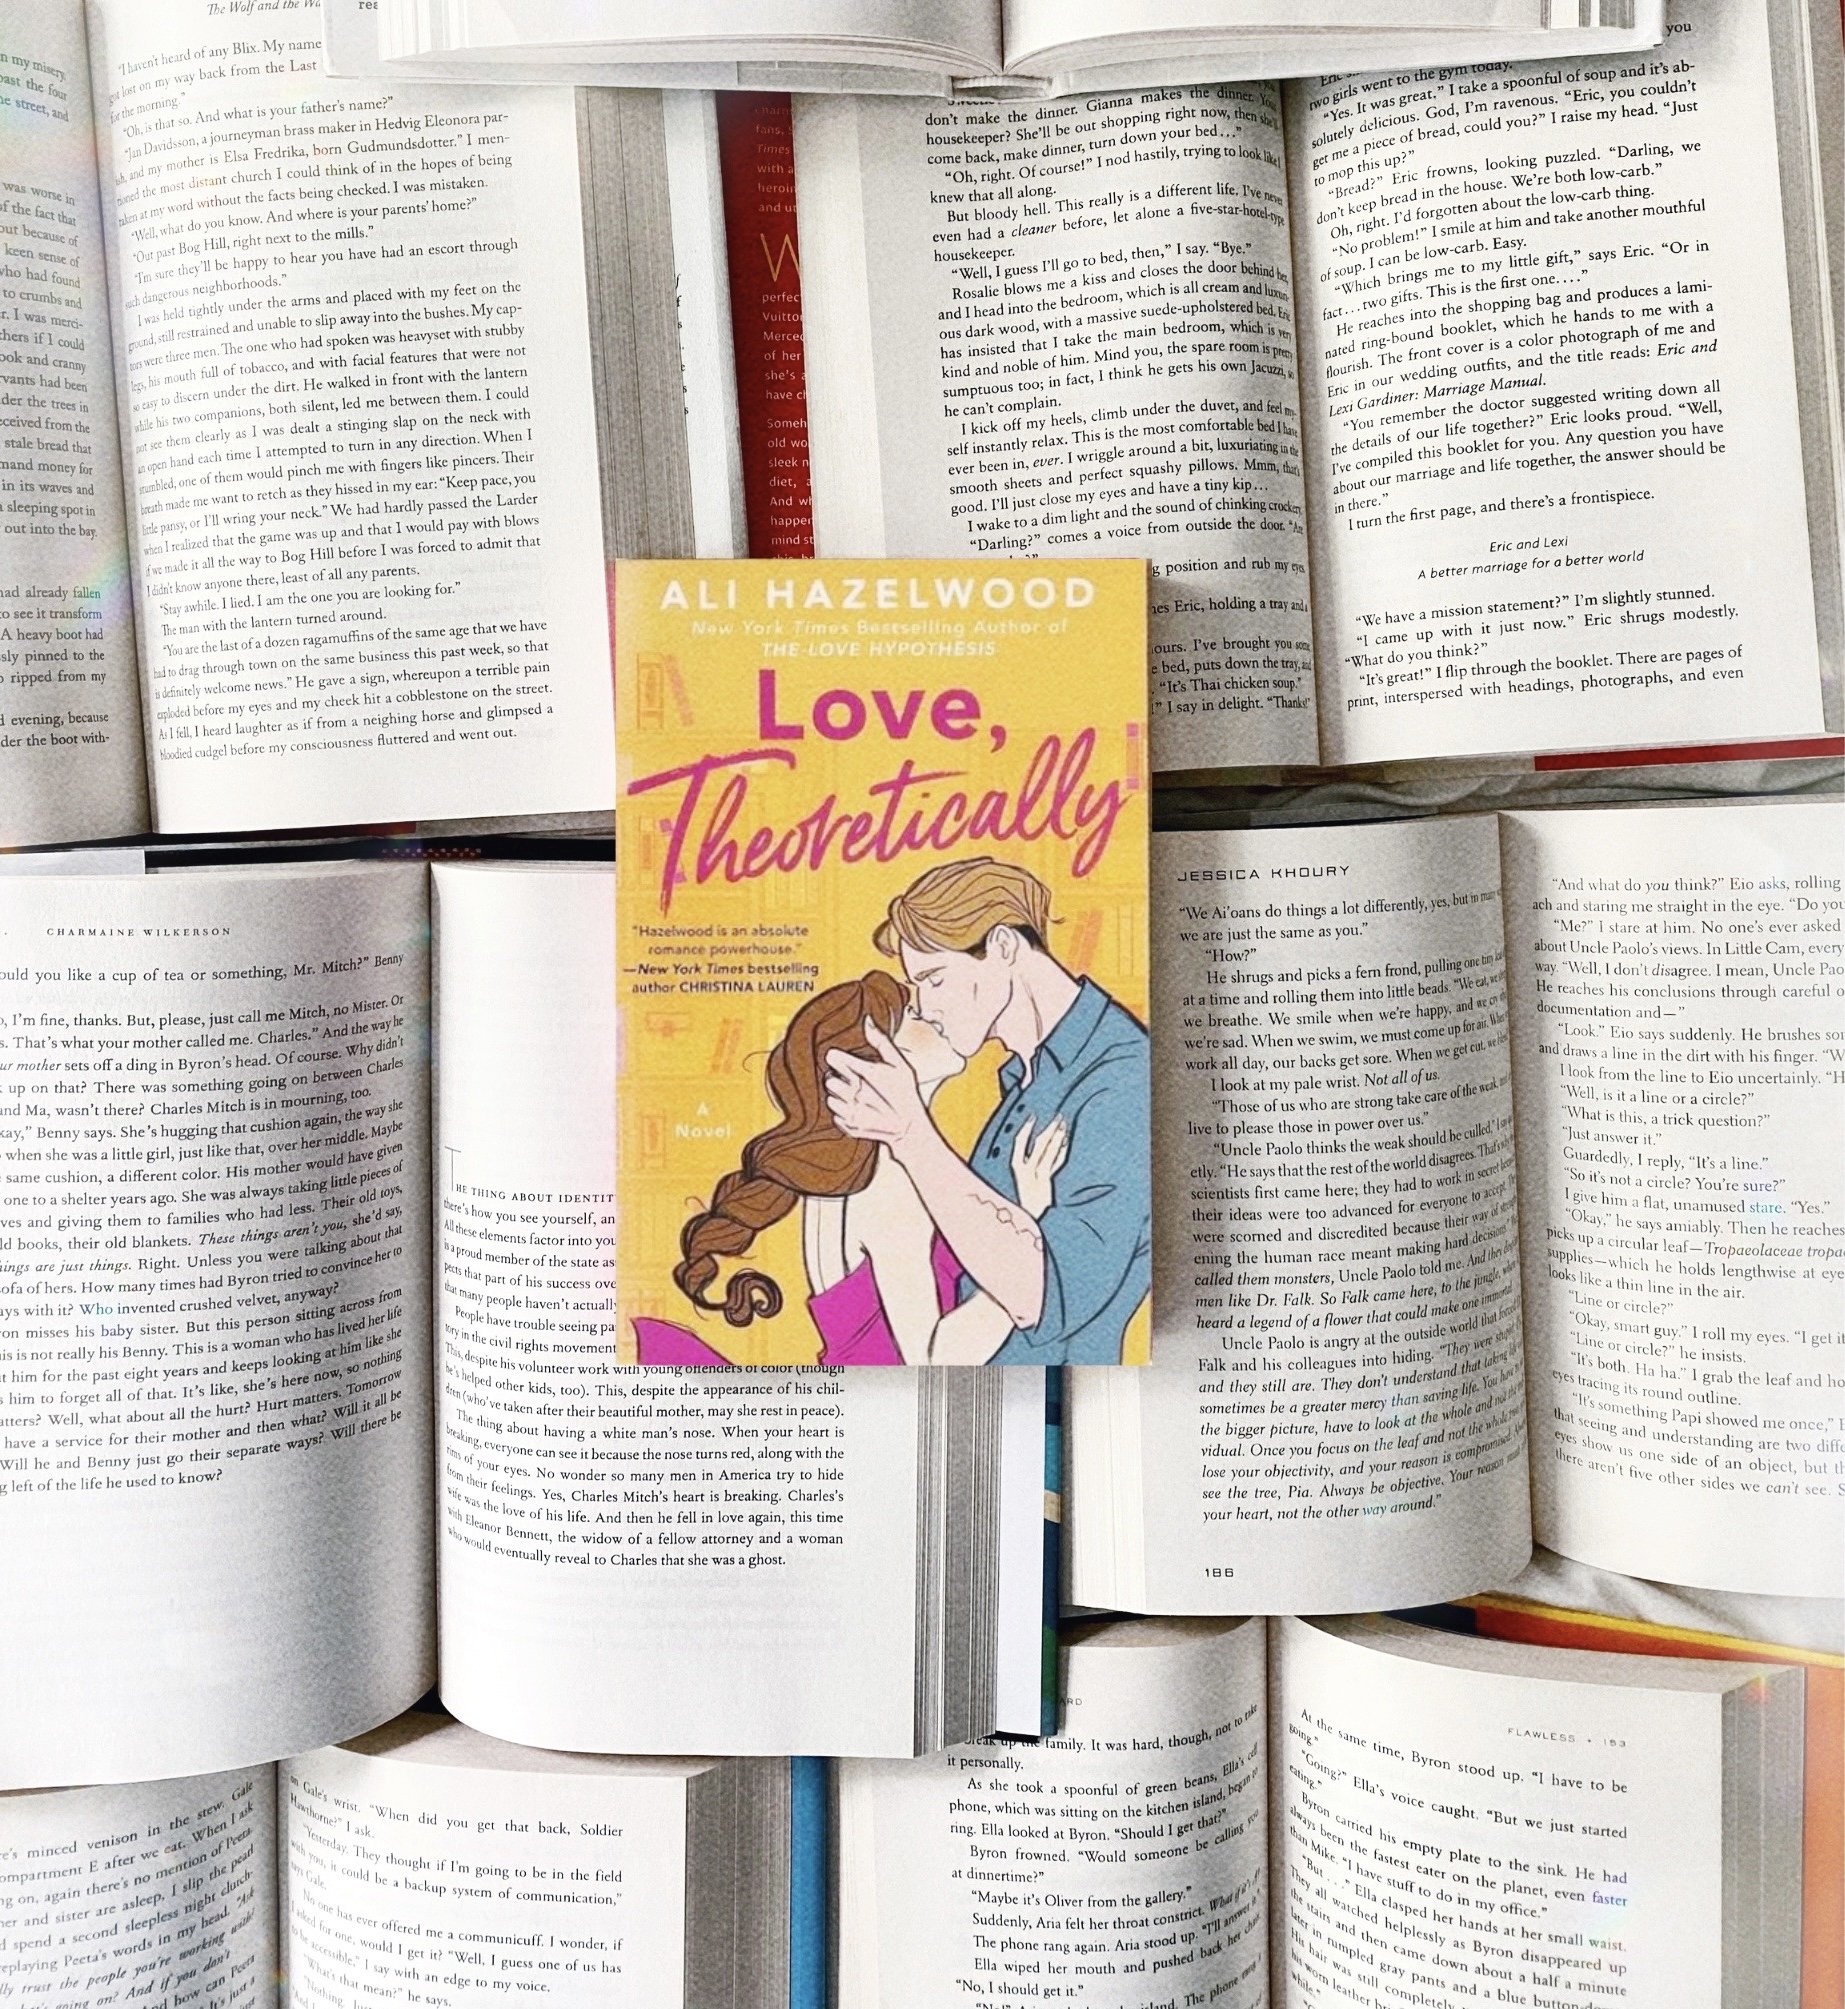 Romance Book Review Love Theoretically by Ali Hazelwood — What Is Quinn Reading?